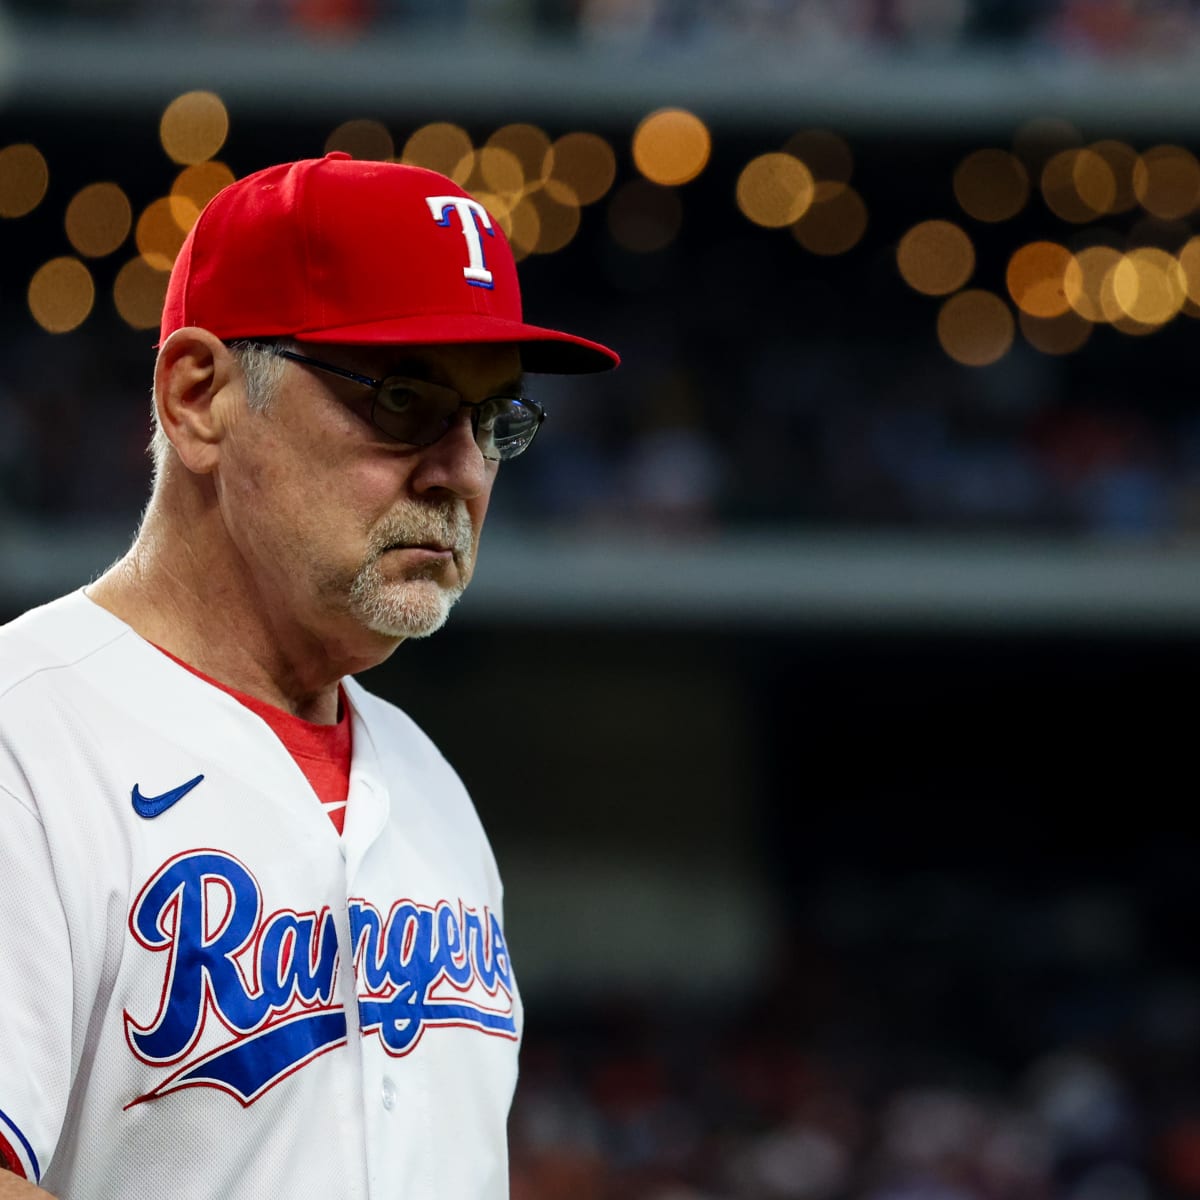 Bruce Bochy takes over Texas Rangers after missing the game - ESPN